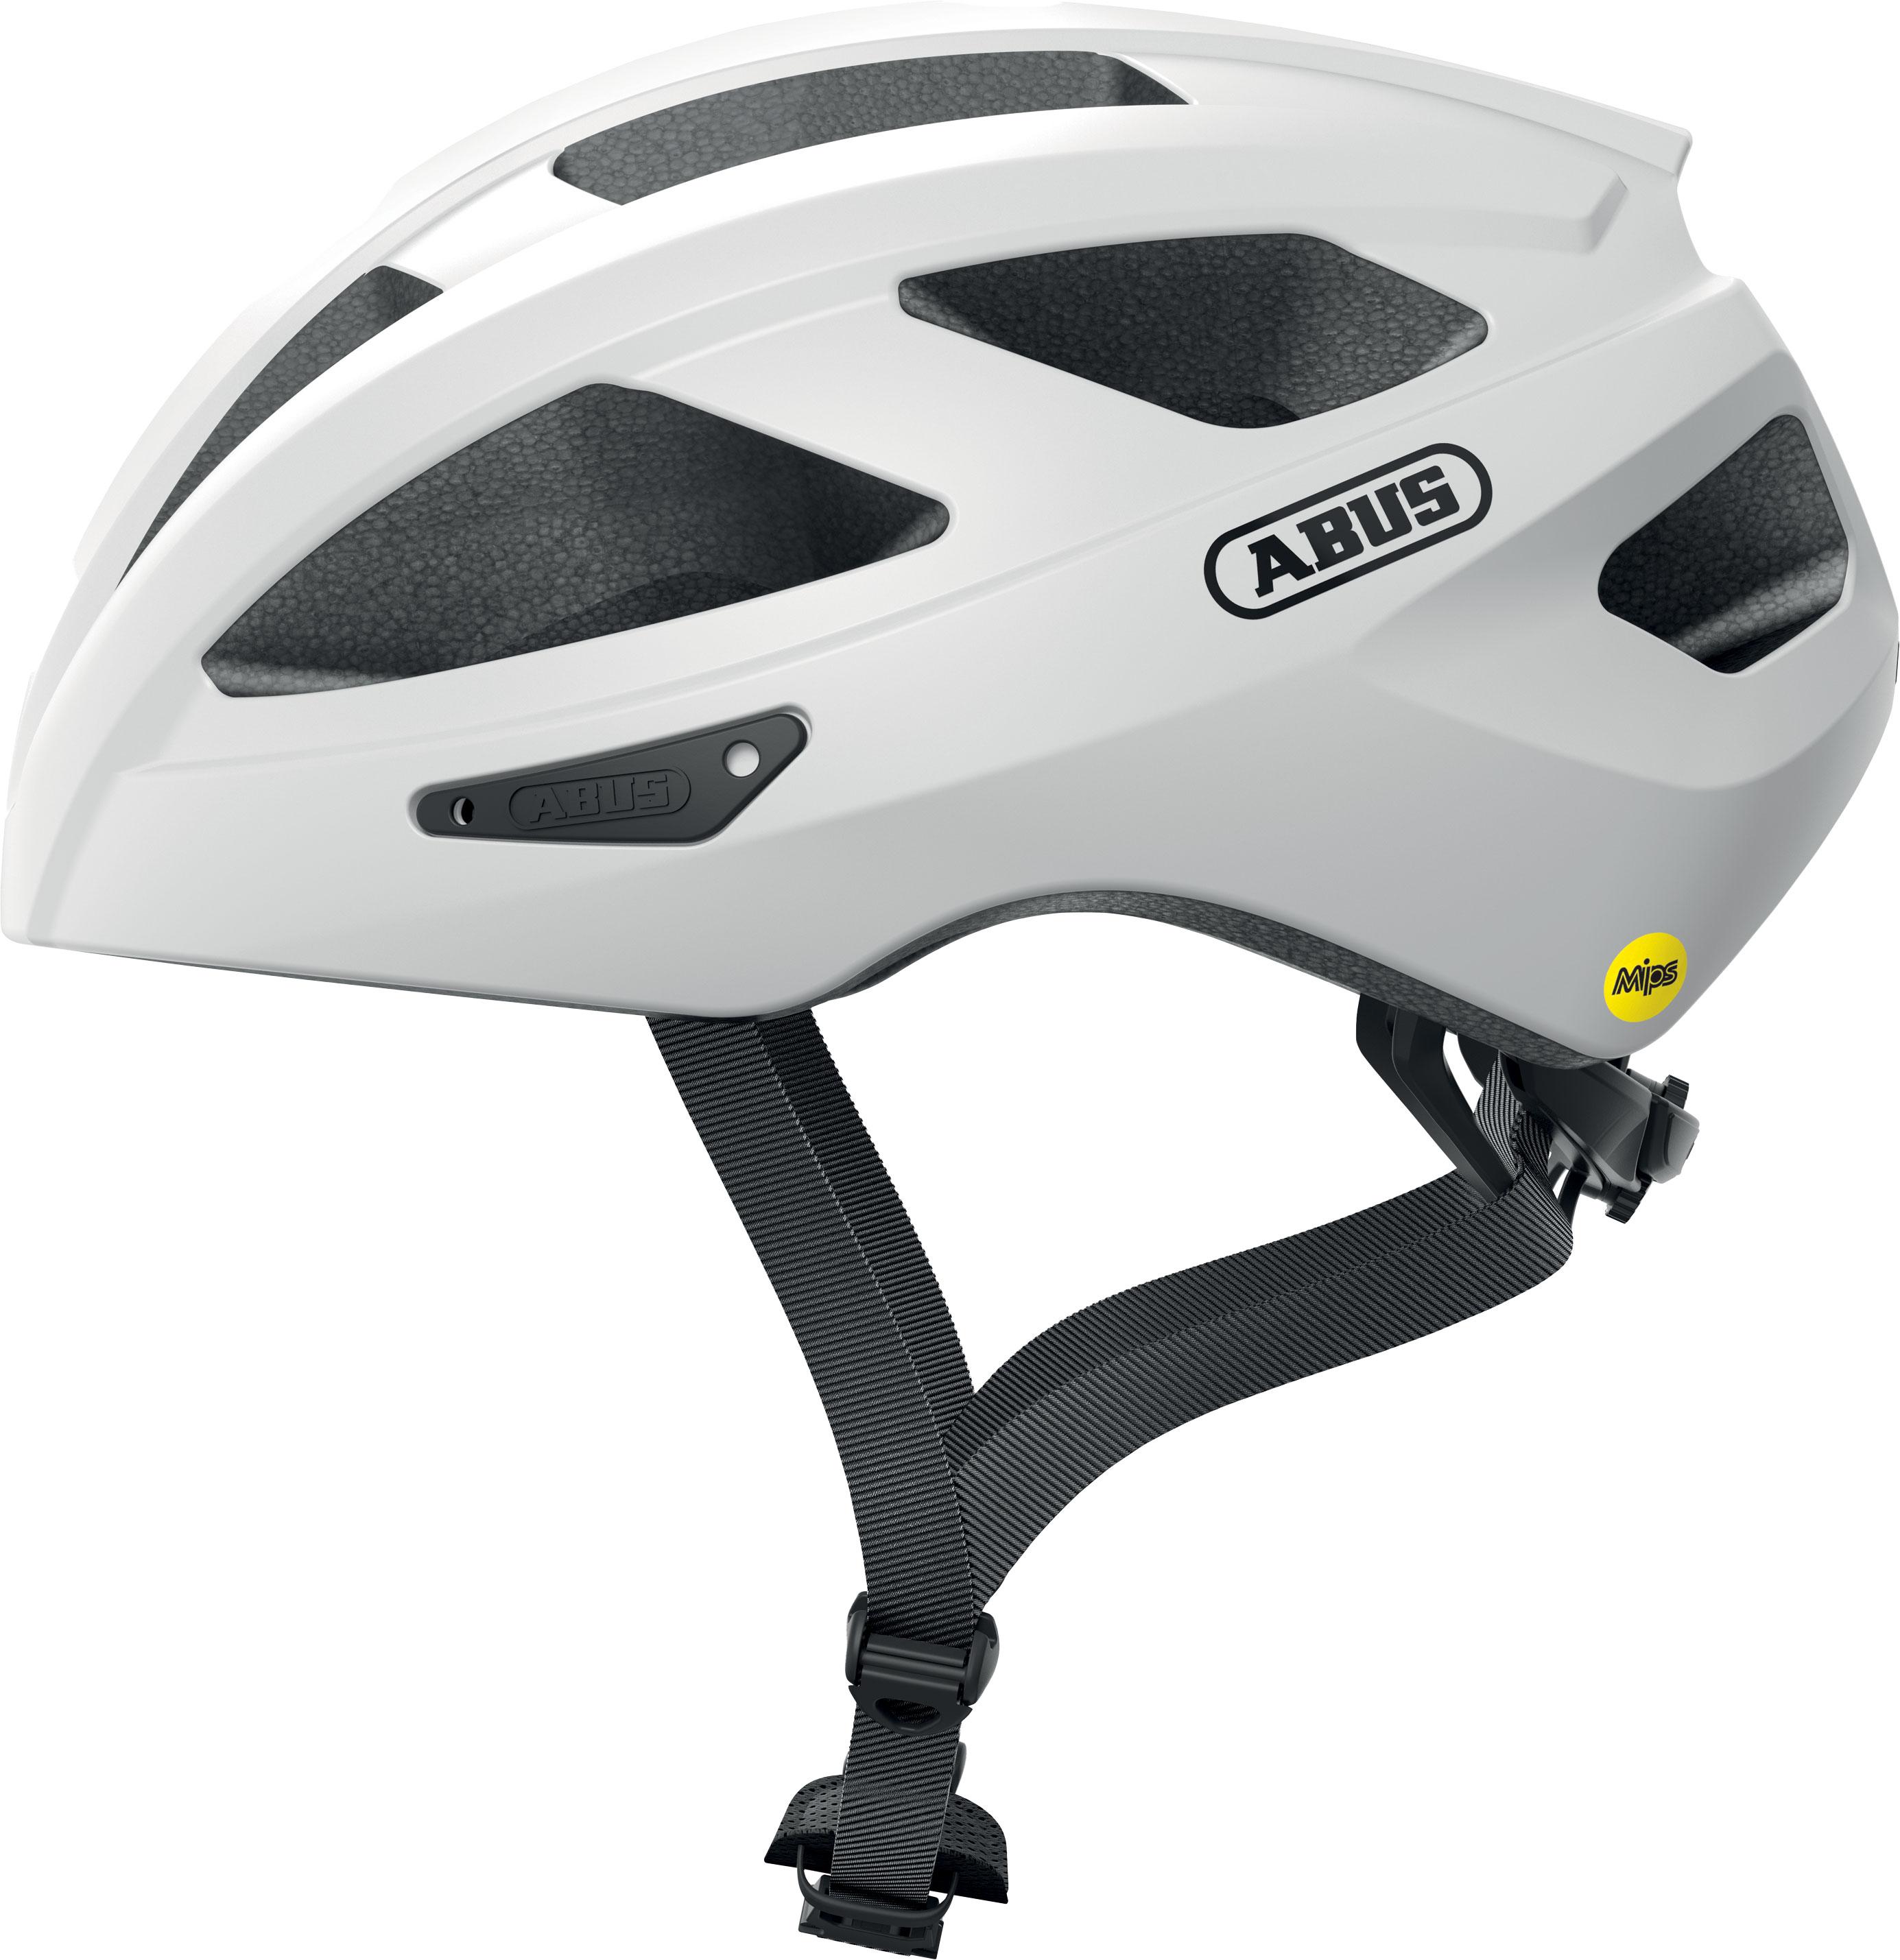 Abus Macator Road Cycling Helmet Mips - White/silver